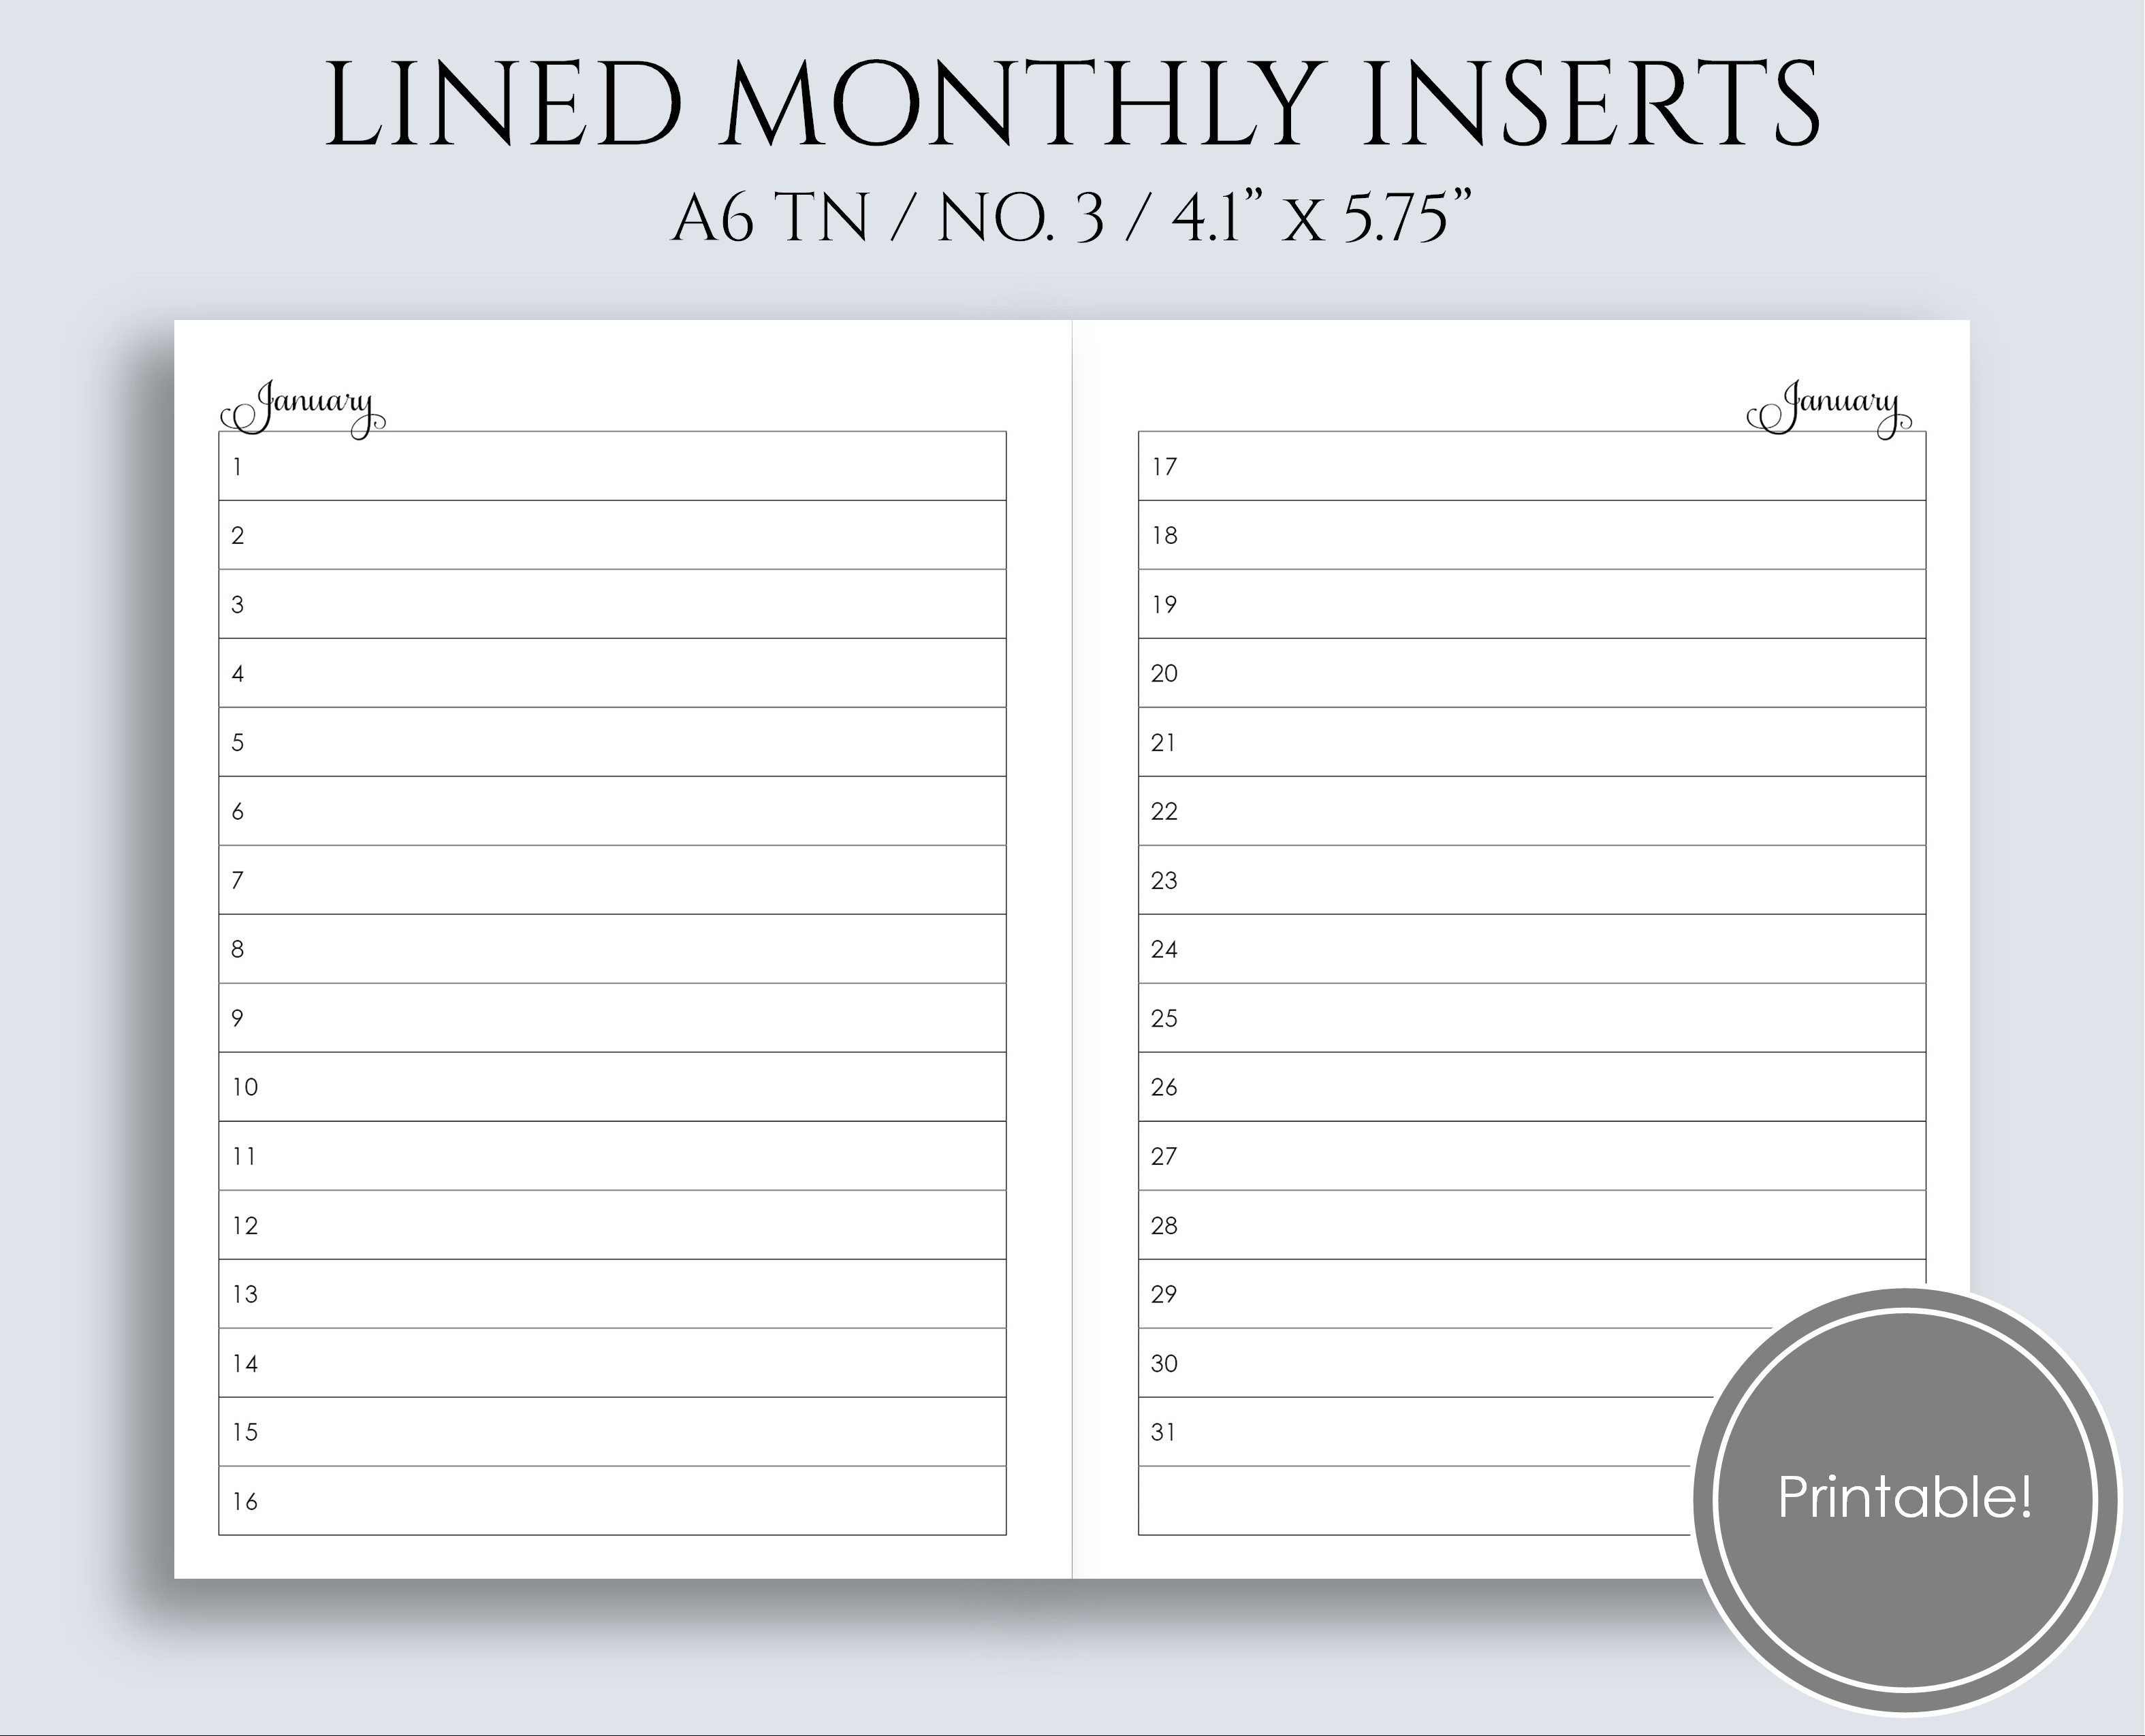 Lined Monthly Calendar List A6 Tn No 3 Printable Planner pertaining to Printable Lined Monthly Calendar